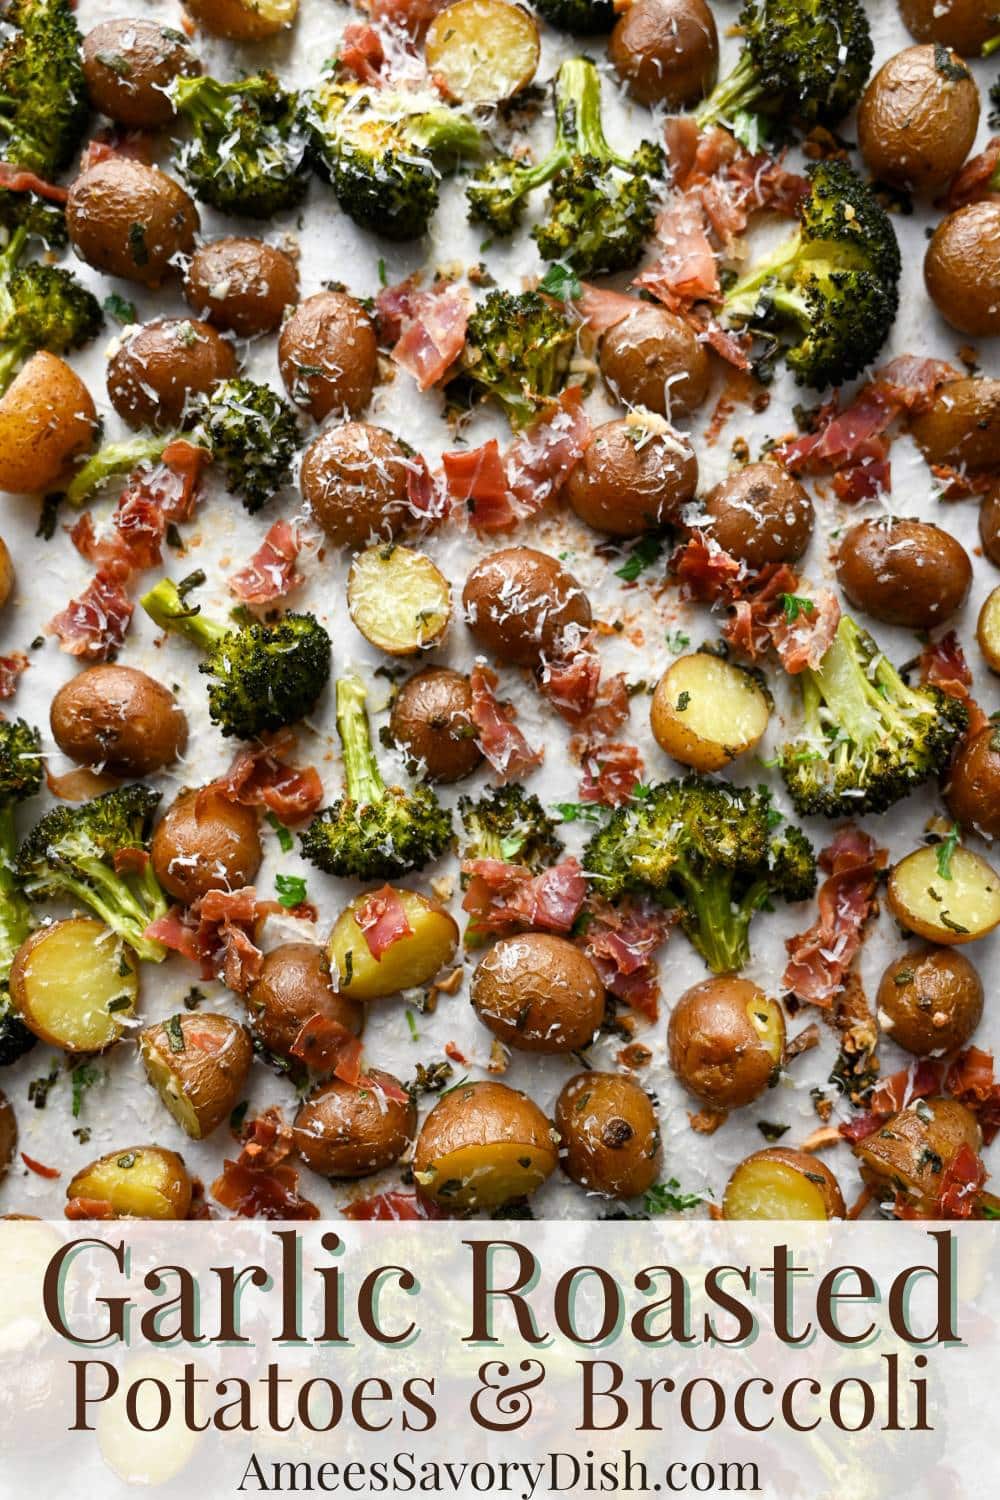 This Roasted Potatoes and Broccoli recipe showcases baby red potatoes and broccoli florets paired with garlic, herbs, and crispy prosciutto. via @Ameessavorydish